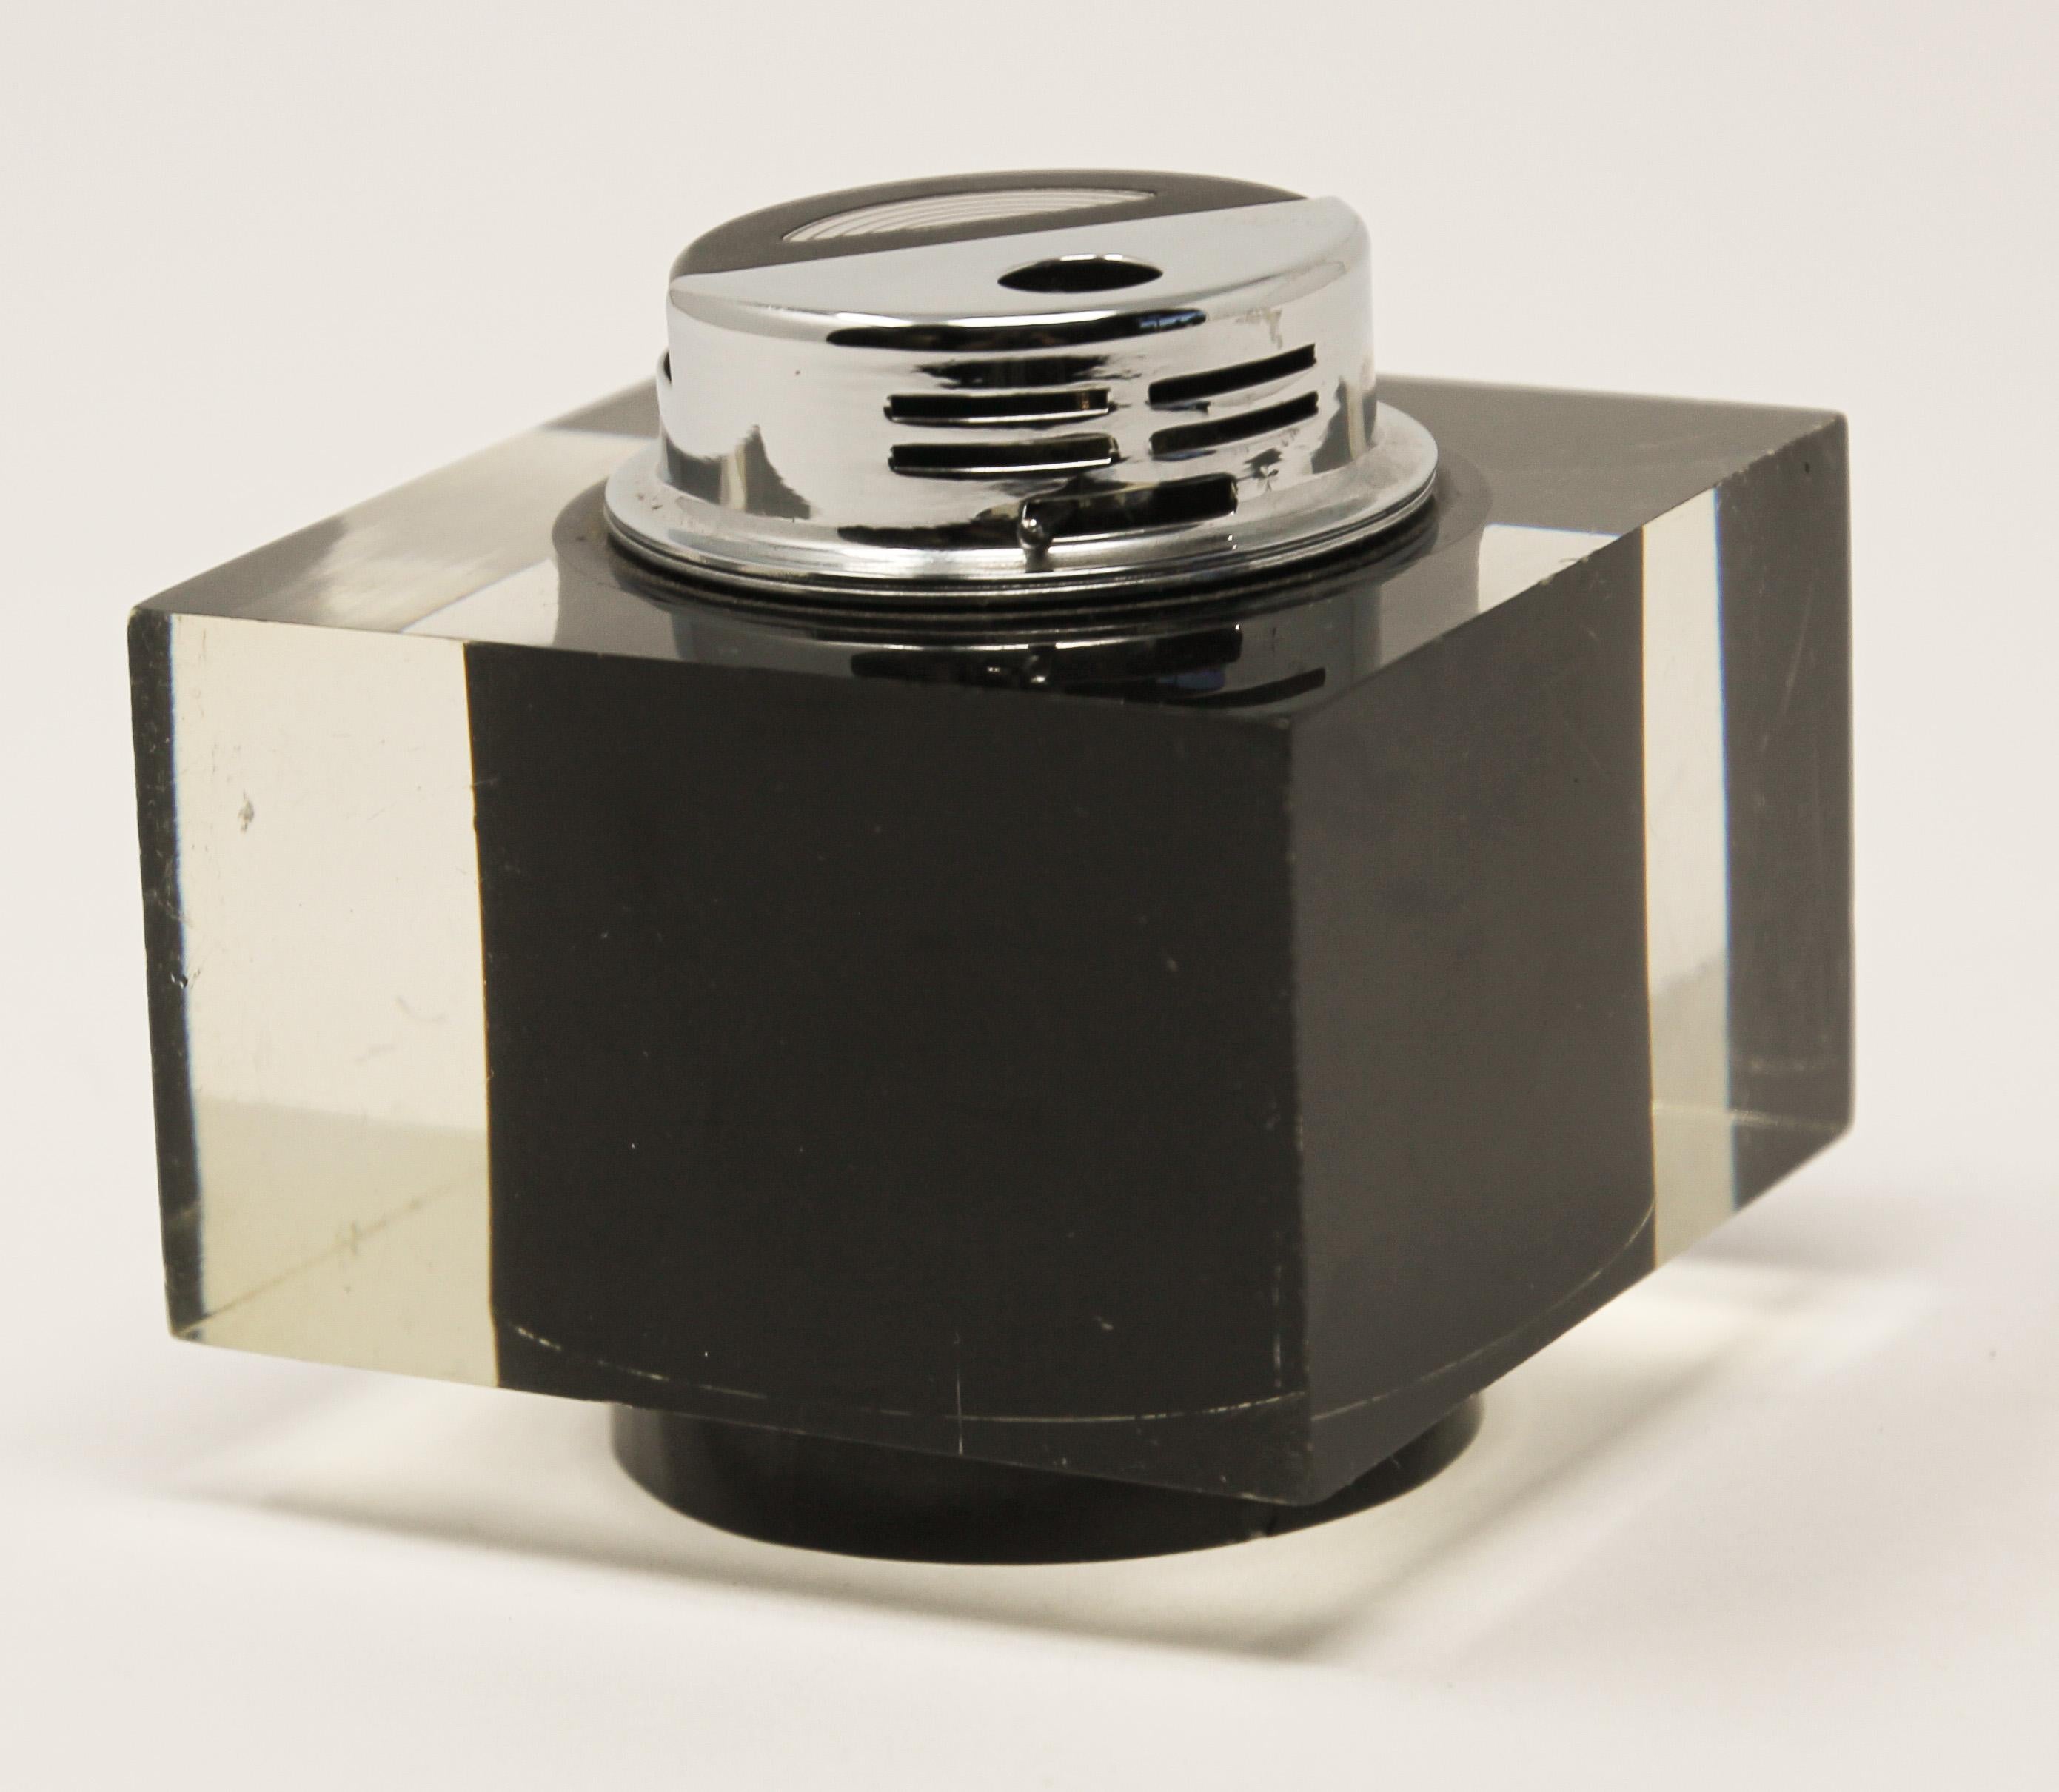 Vintage retro 1970s Lucite cube table lighter-paperweight.
Mid-Century Modern retro square lighter in black and clear Lucite with chrome.
A dramatic accent to any modern living room decor, this square lighter will elevate any coffee table or desk